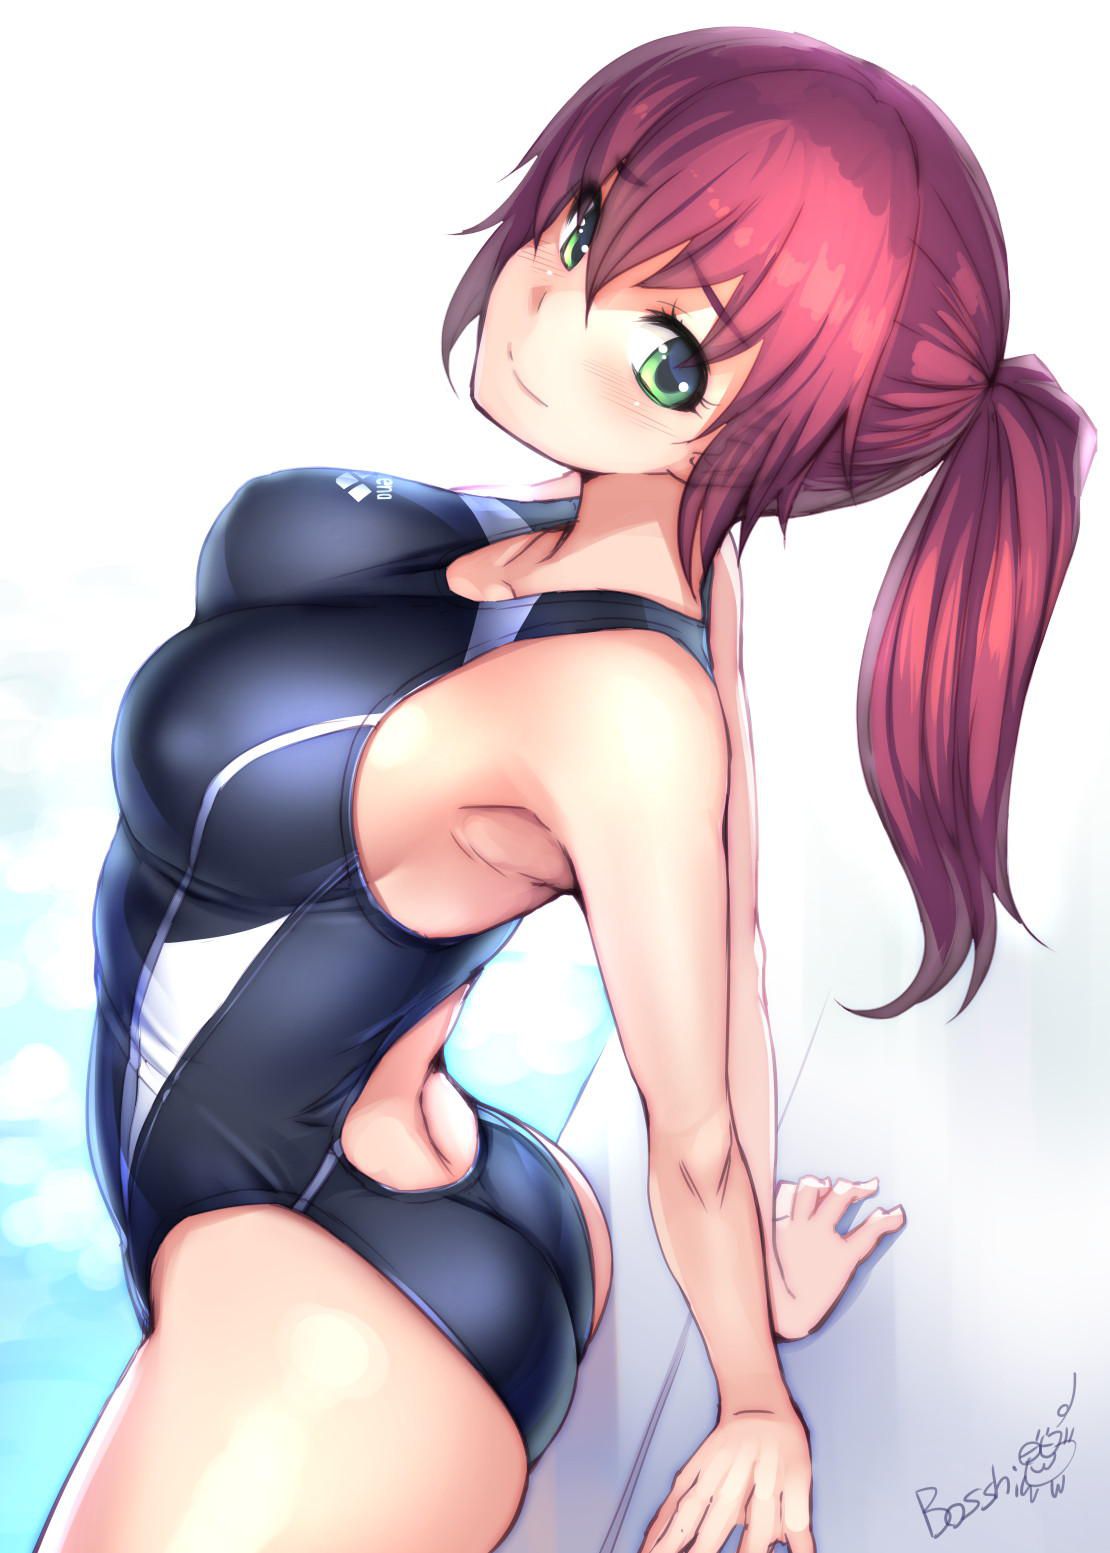 Please take an image of a swimming swimsuit! 5